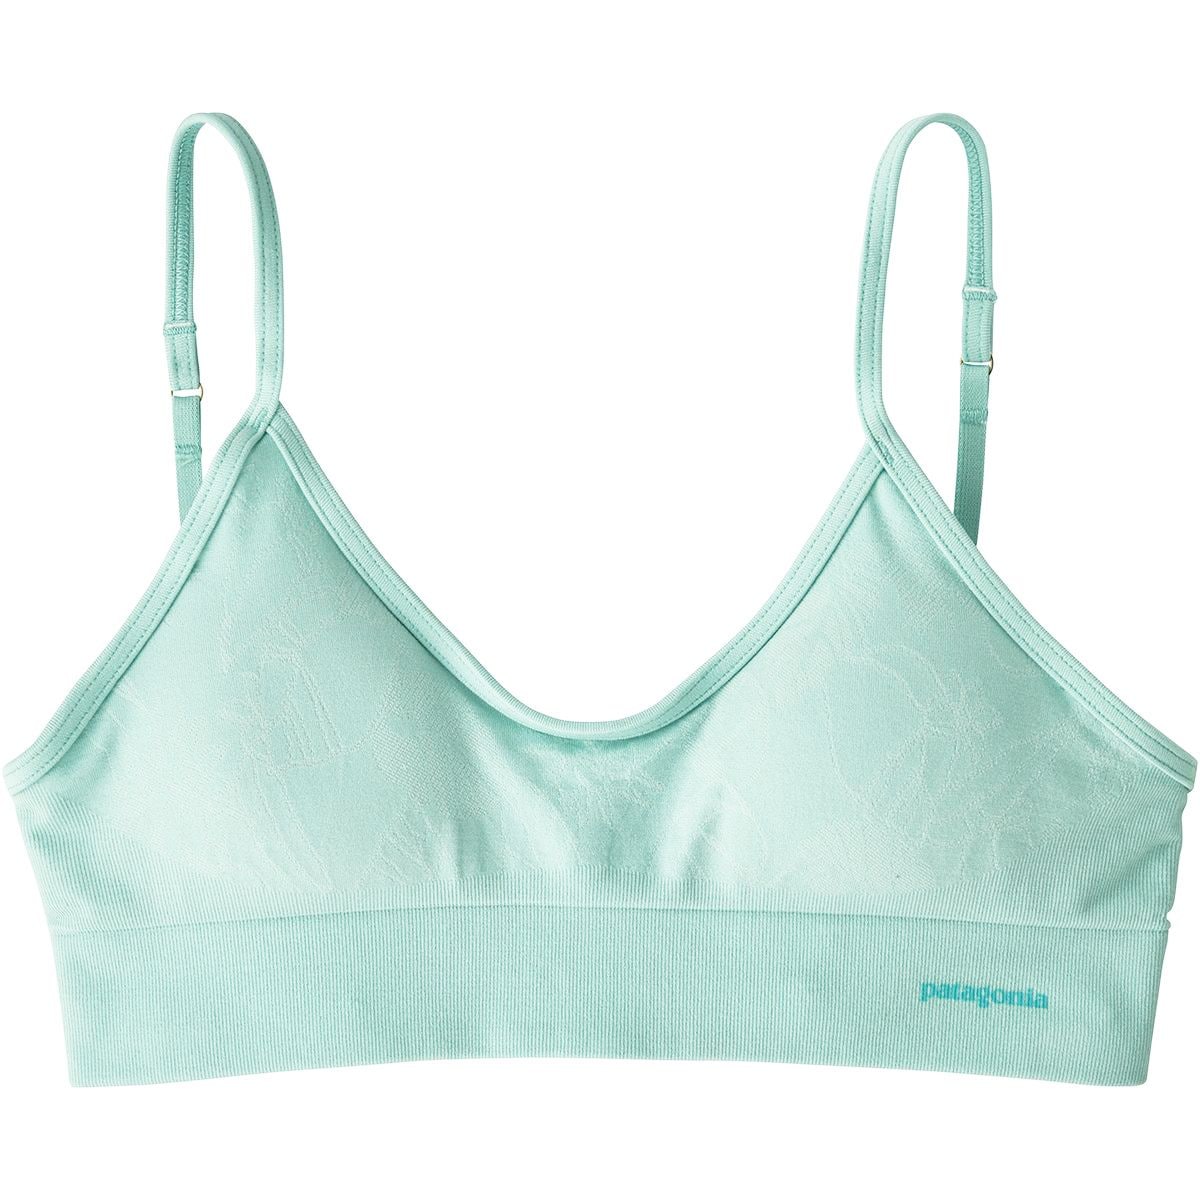 Patagonia Barely Everyday Bra - Women's - Clothing